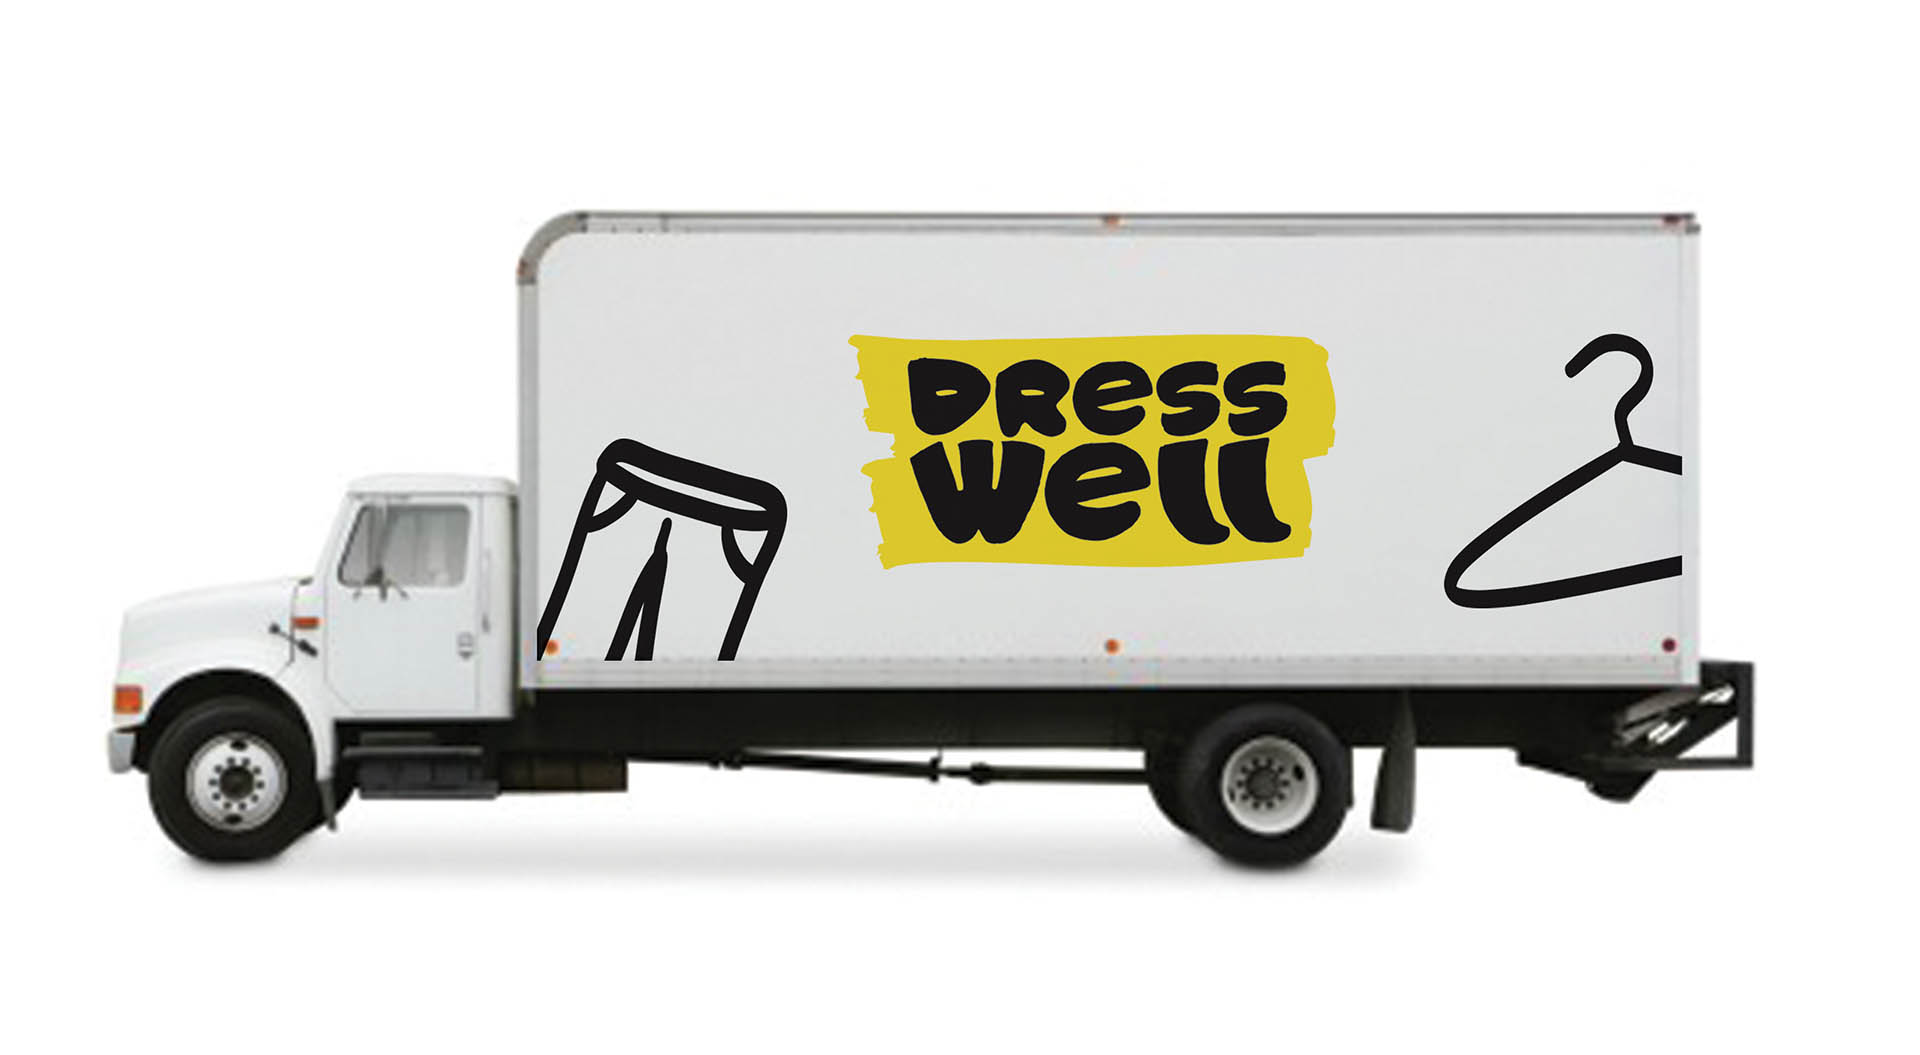 Deliver vehicle for Dress Well